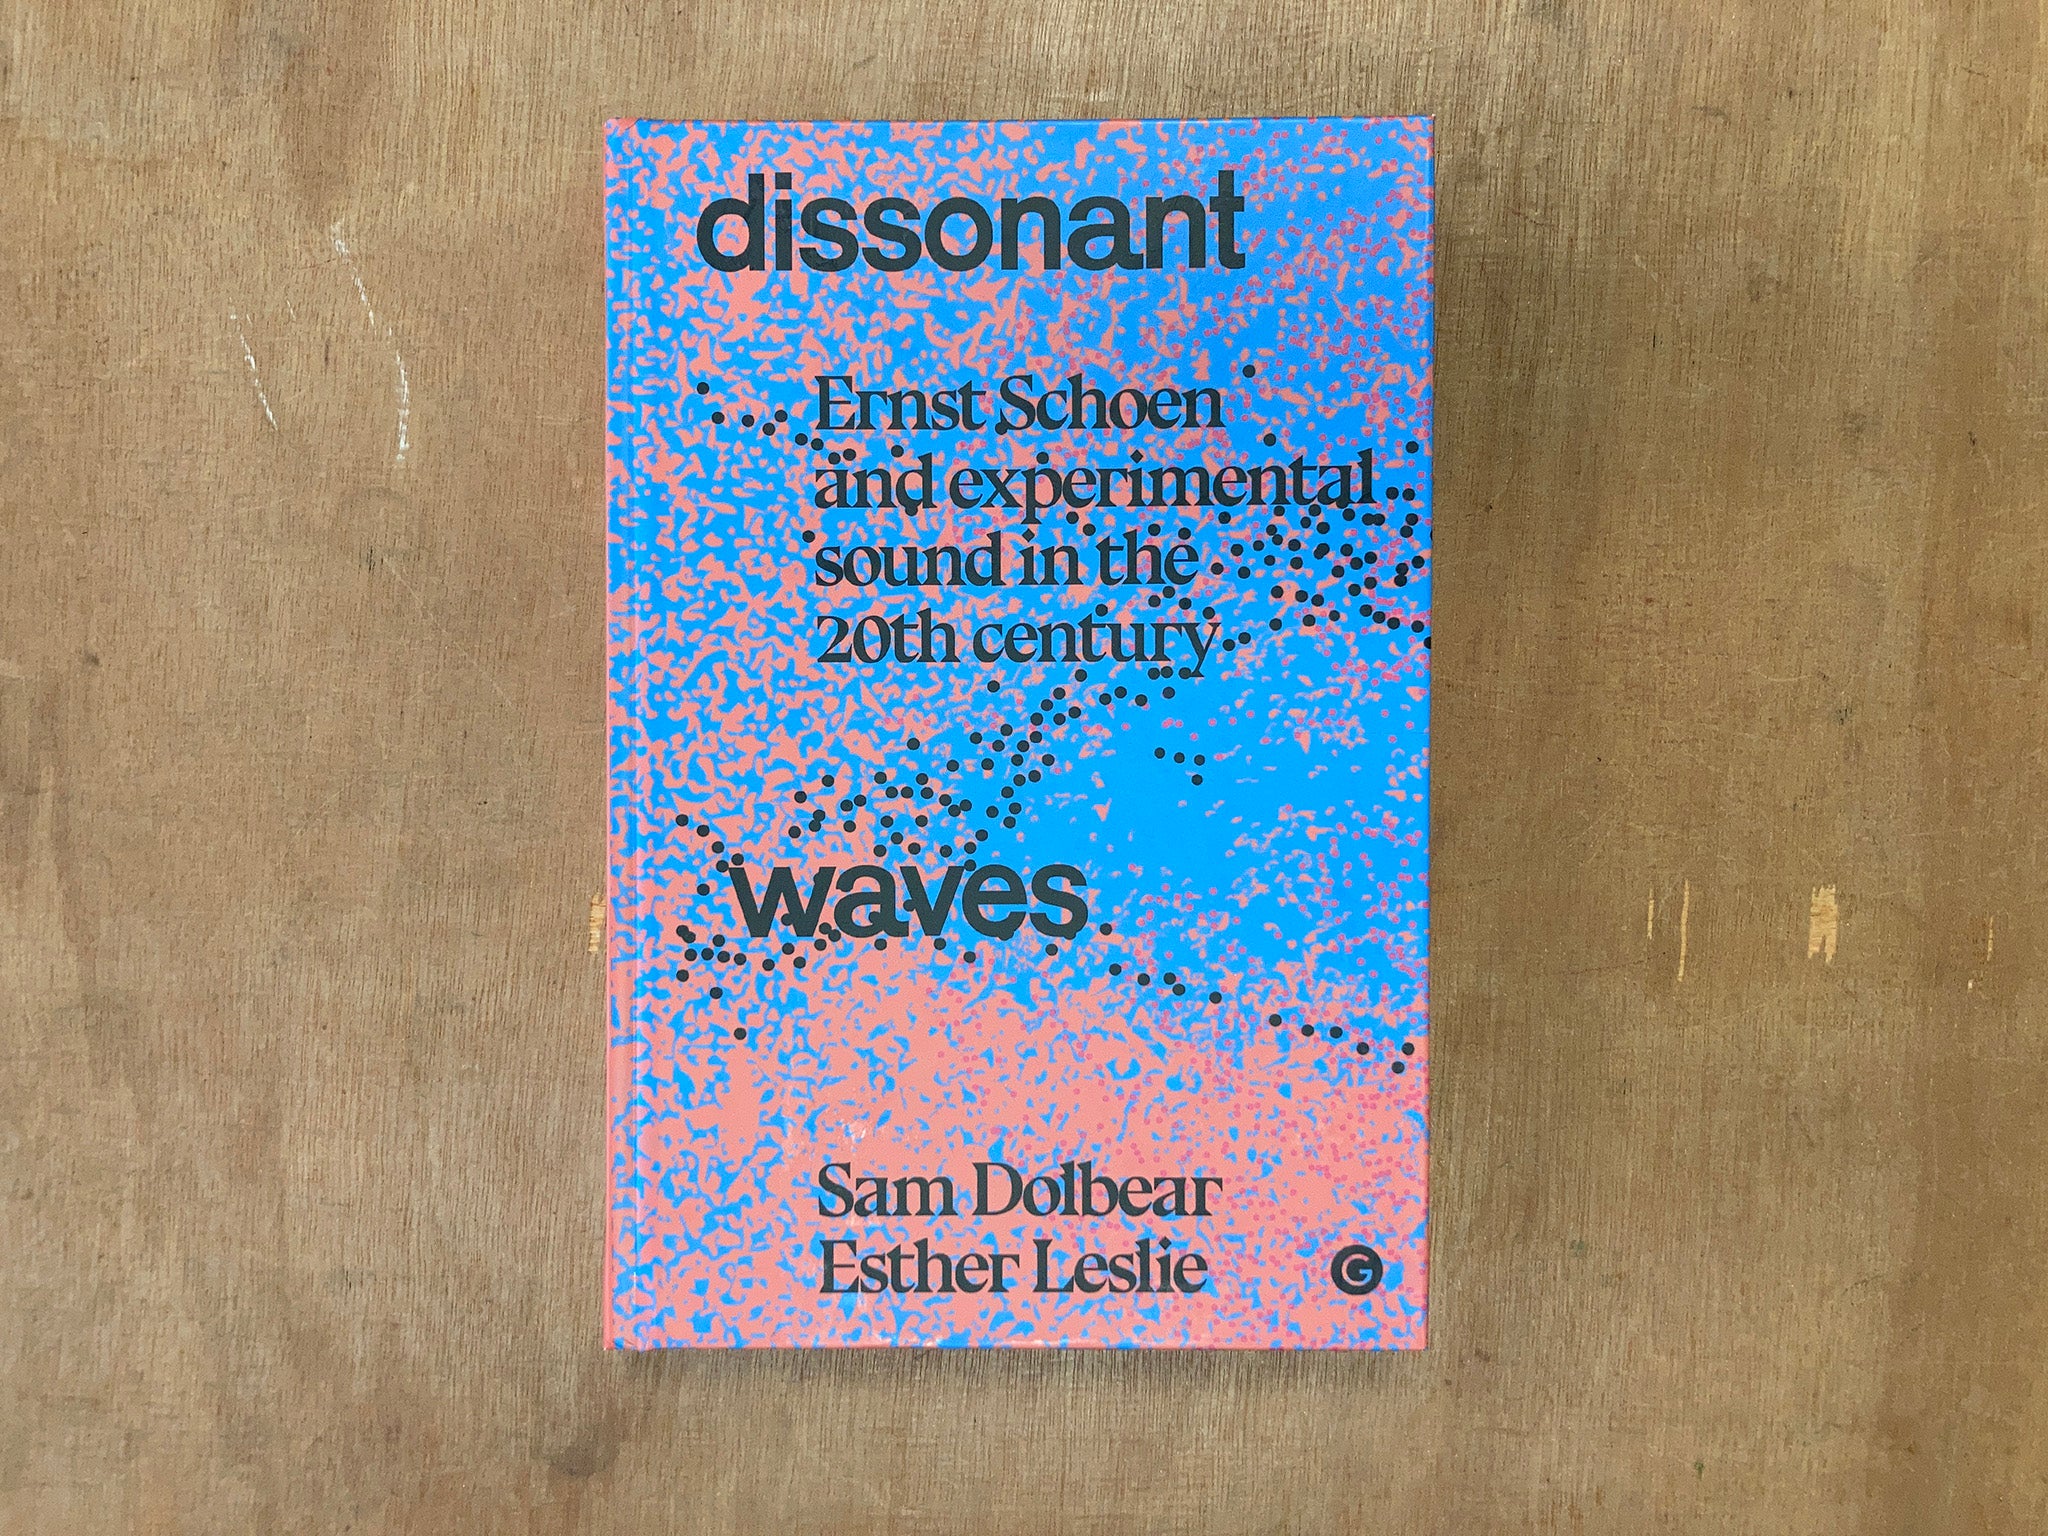 DISSONANT WAVES: ERNST SCHOEN AND EXPERIMENTAL SOUND IN THE 20TH CENTURY by Sam Dolbear and Esther Leslie